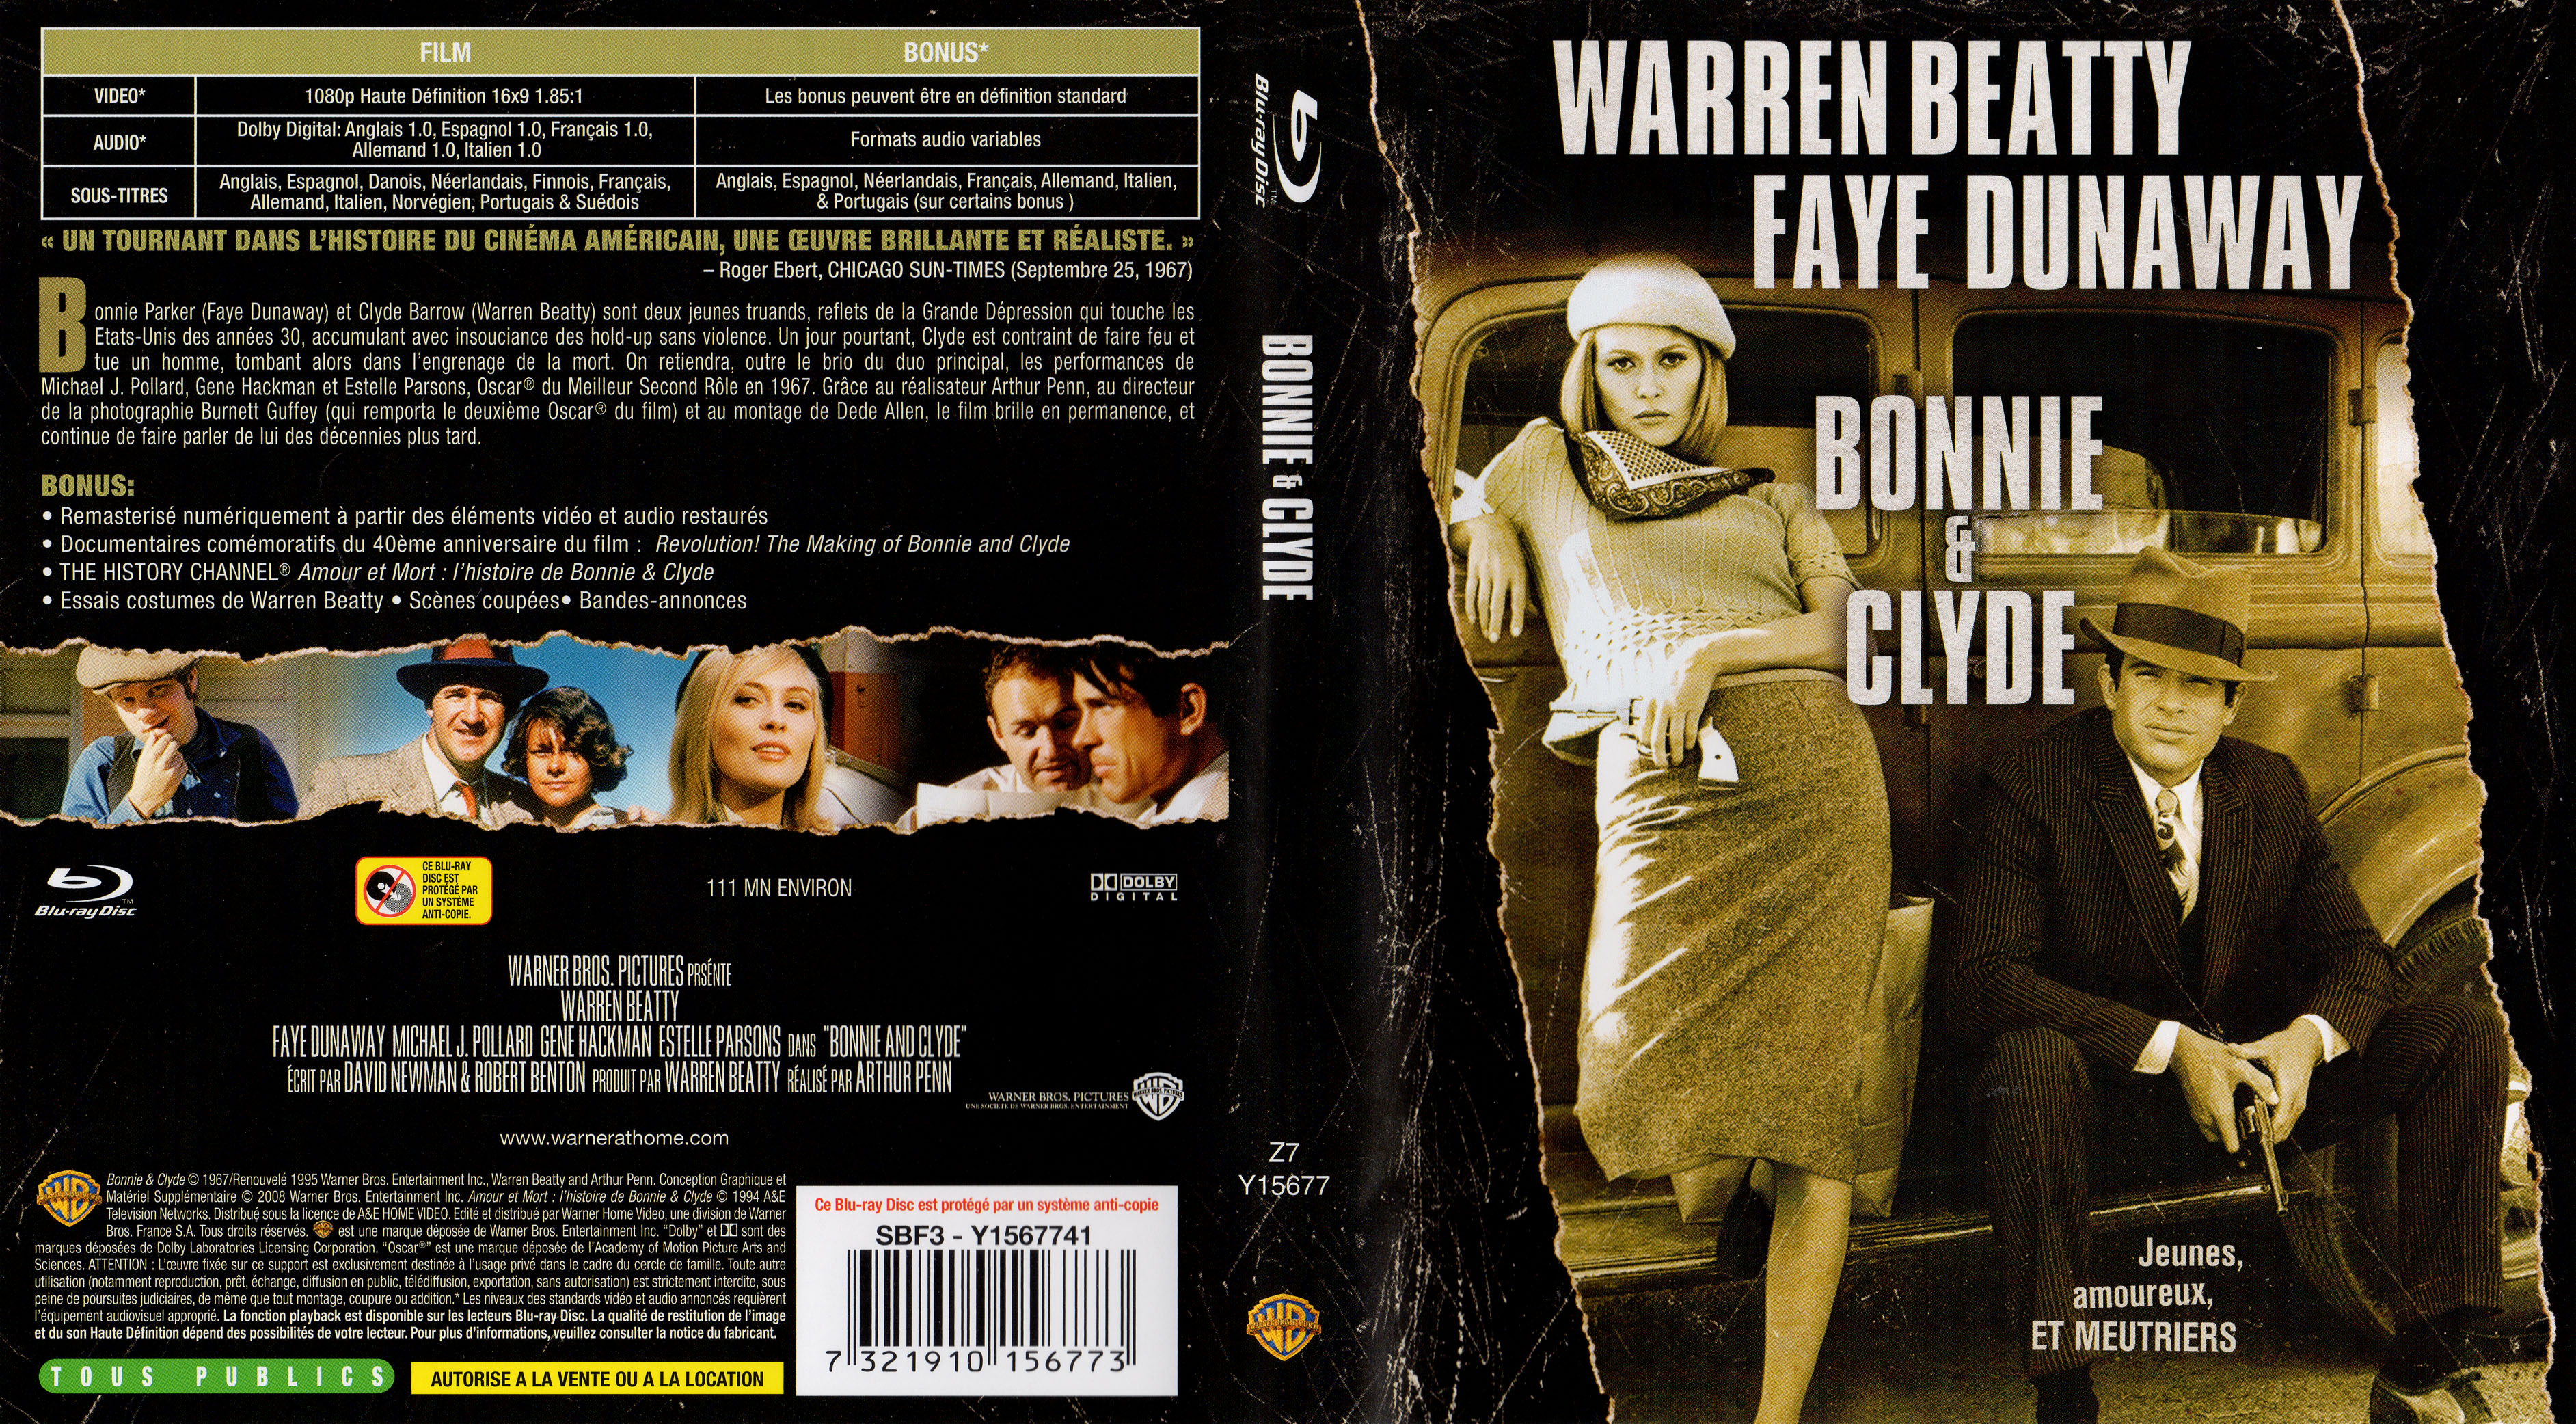 Jaquette DVD Bonnie and Clyde (BLU-RAY) v2